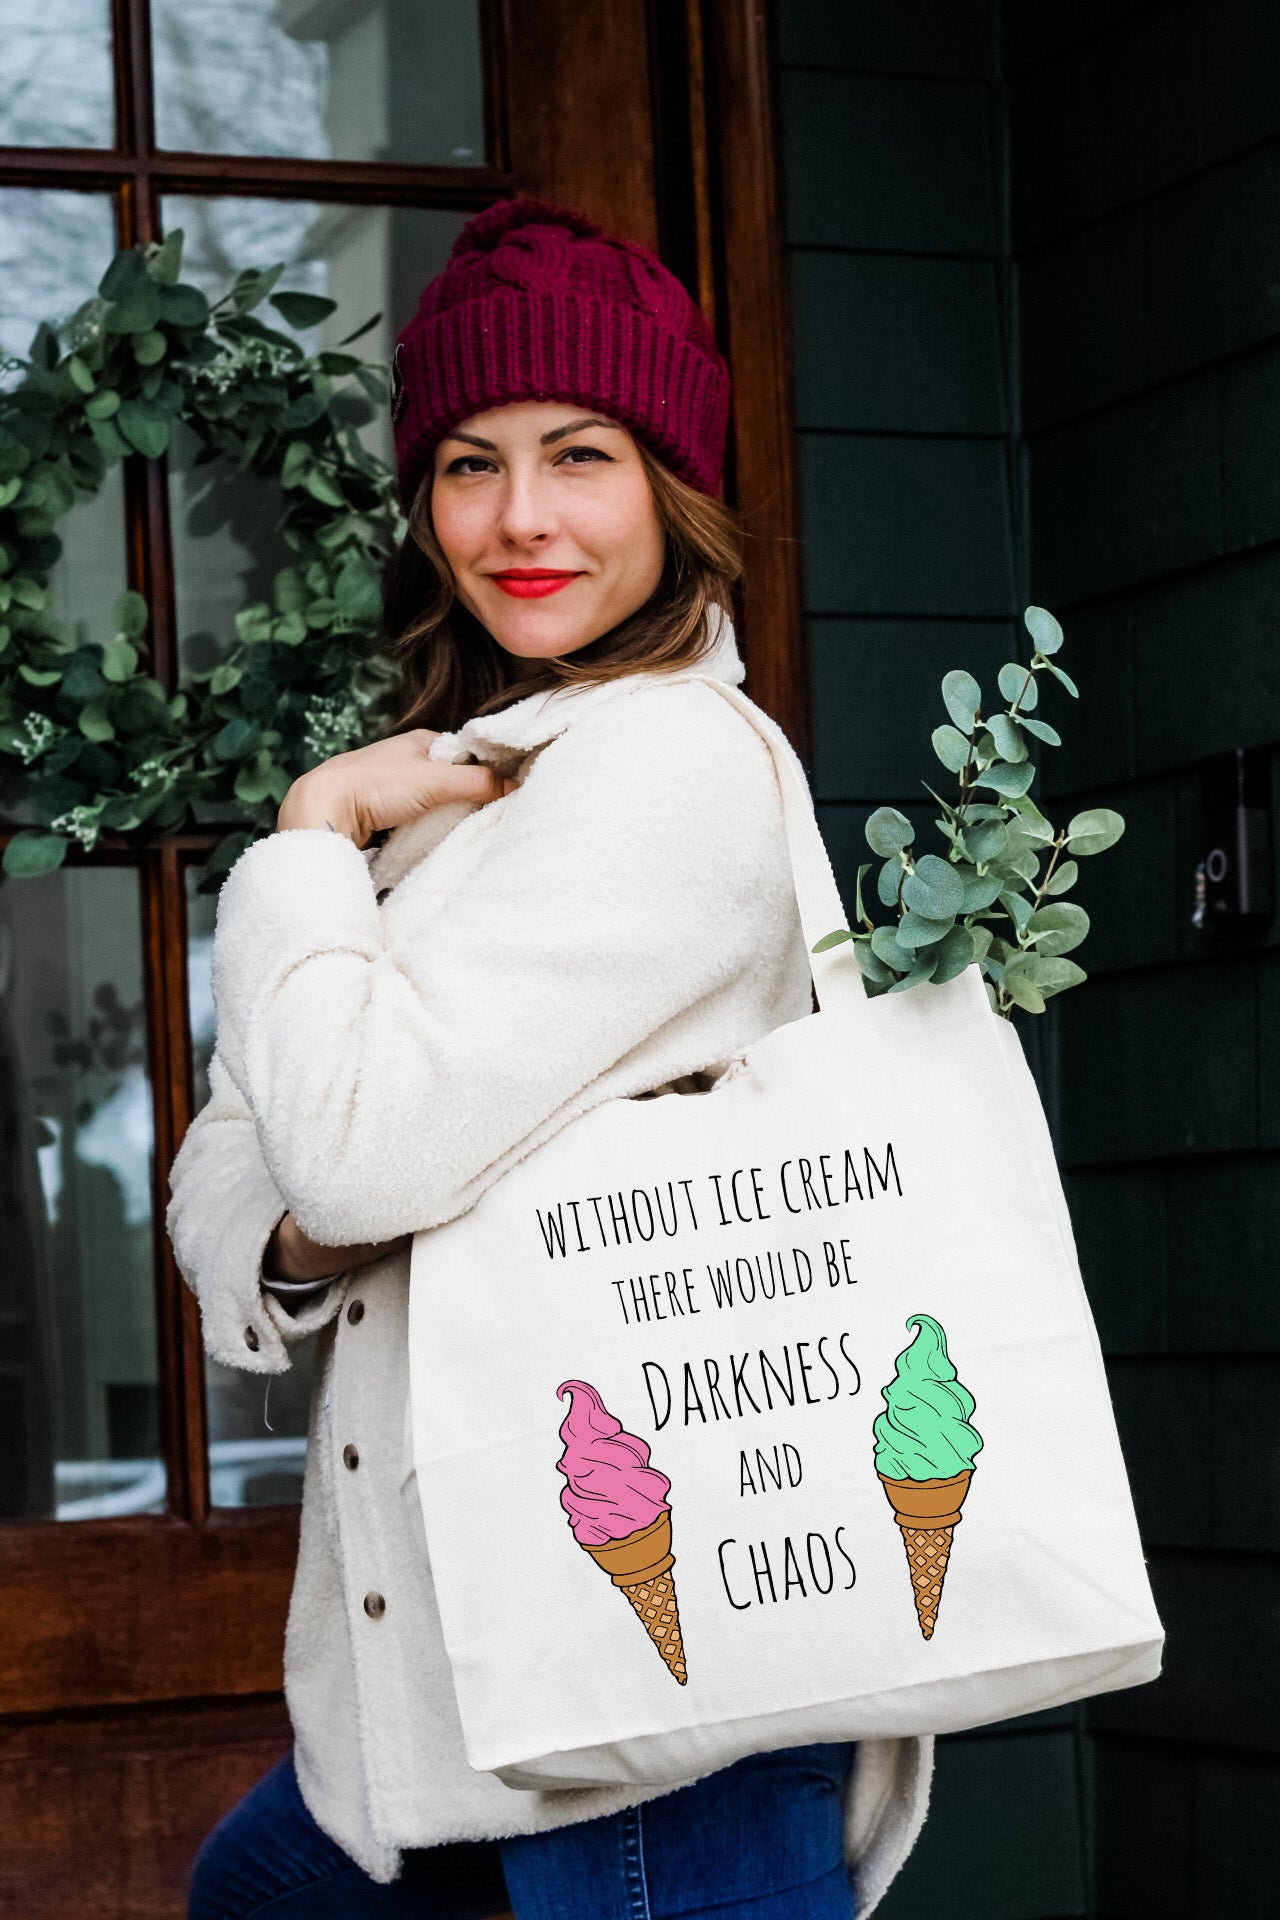 a woman carrying a bag with ice cream on it